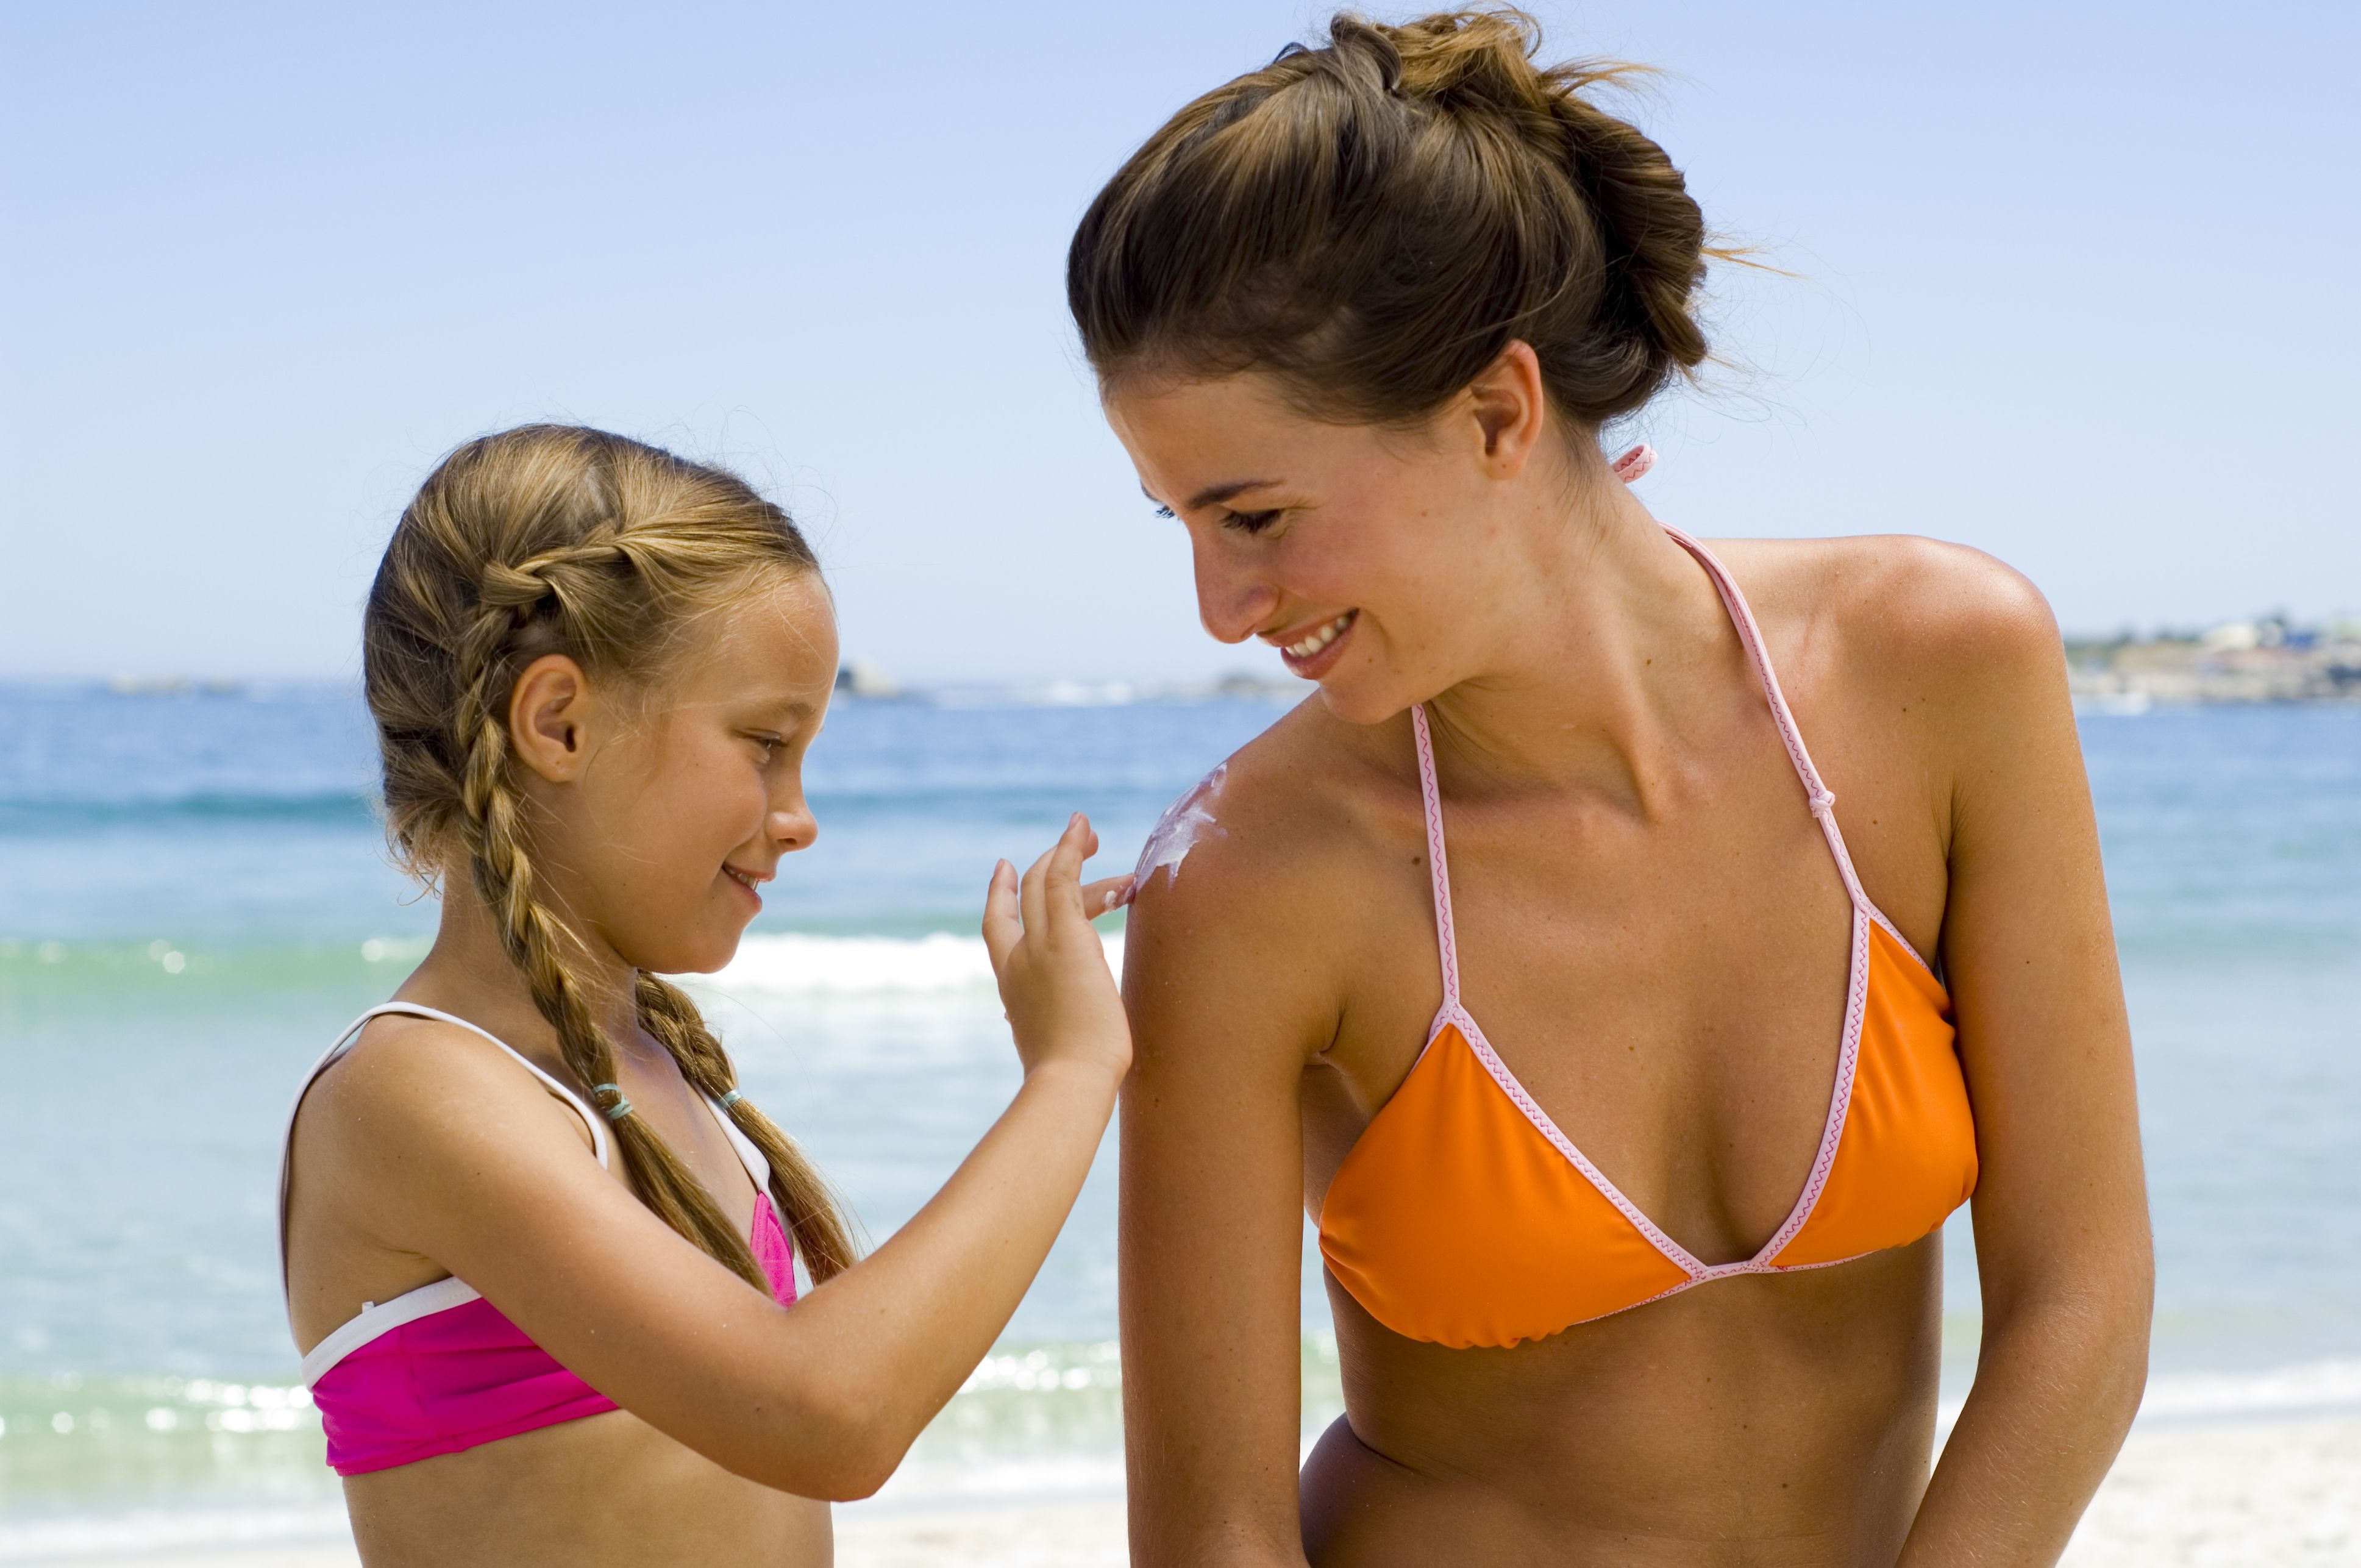 A tan will not protect your skin from sunburn or other skin damage